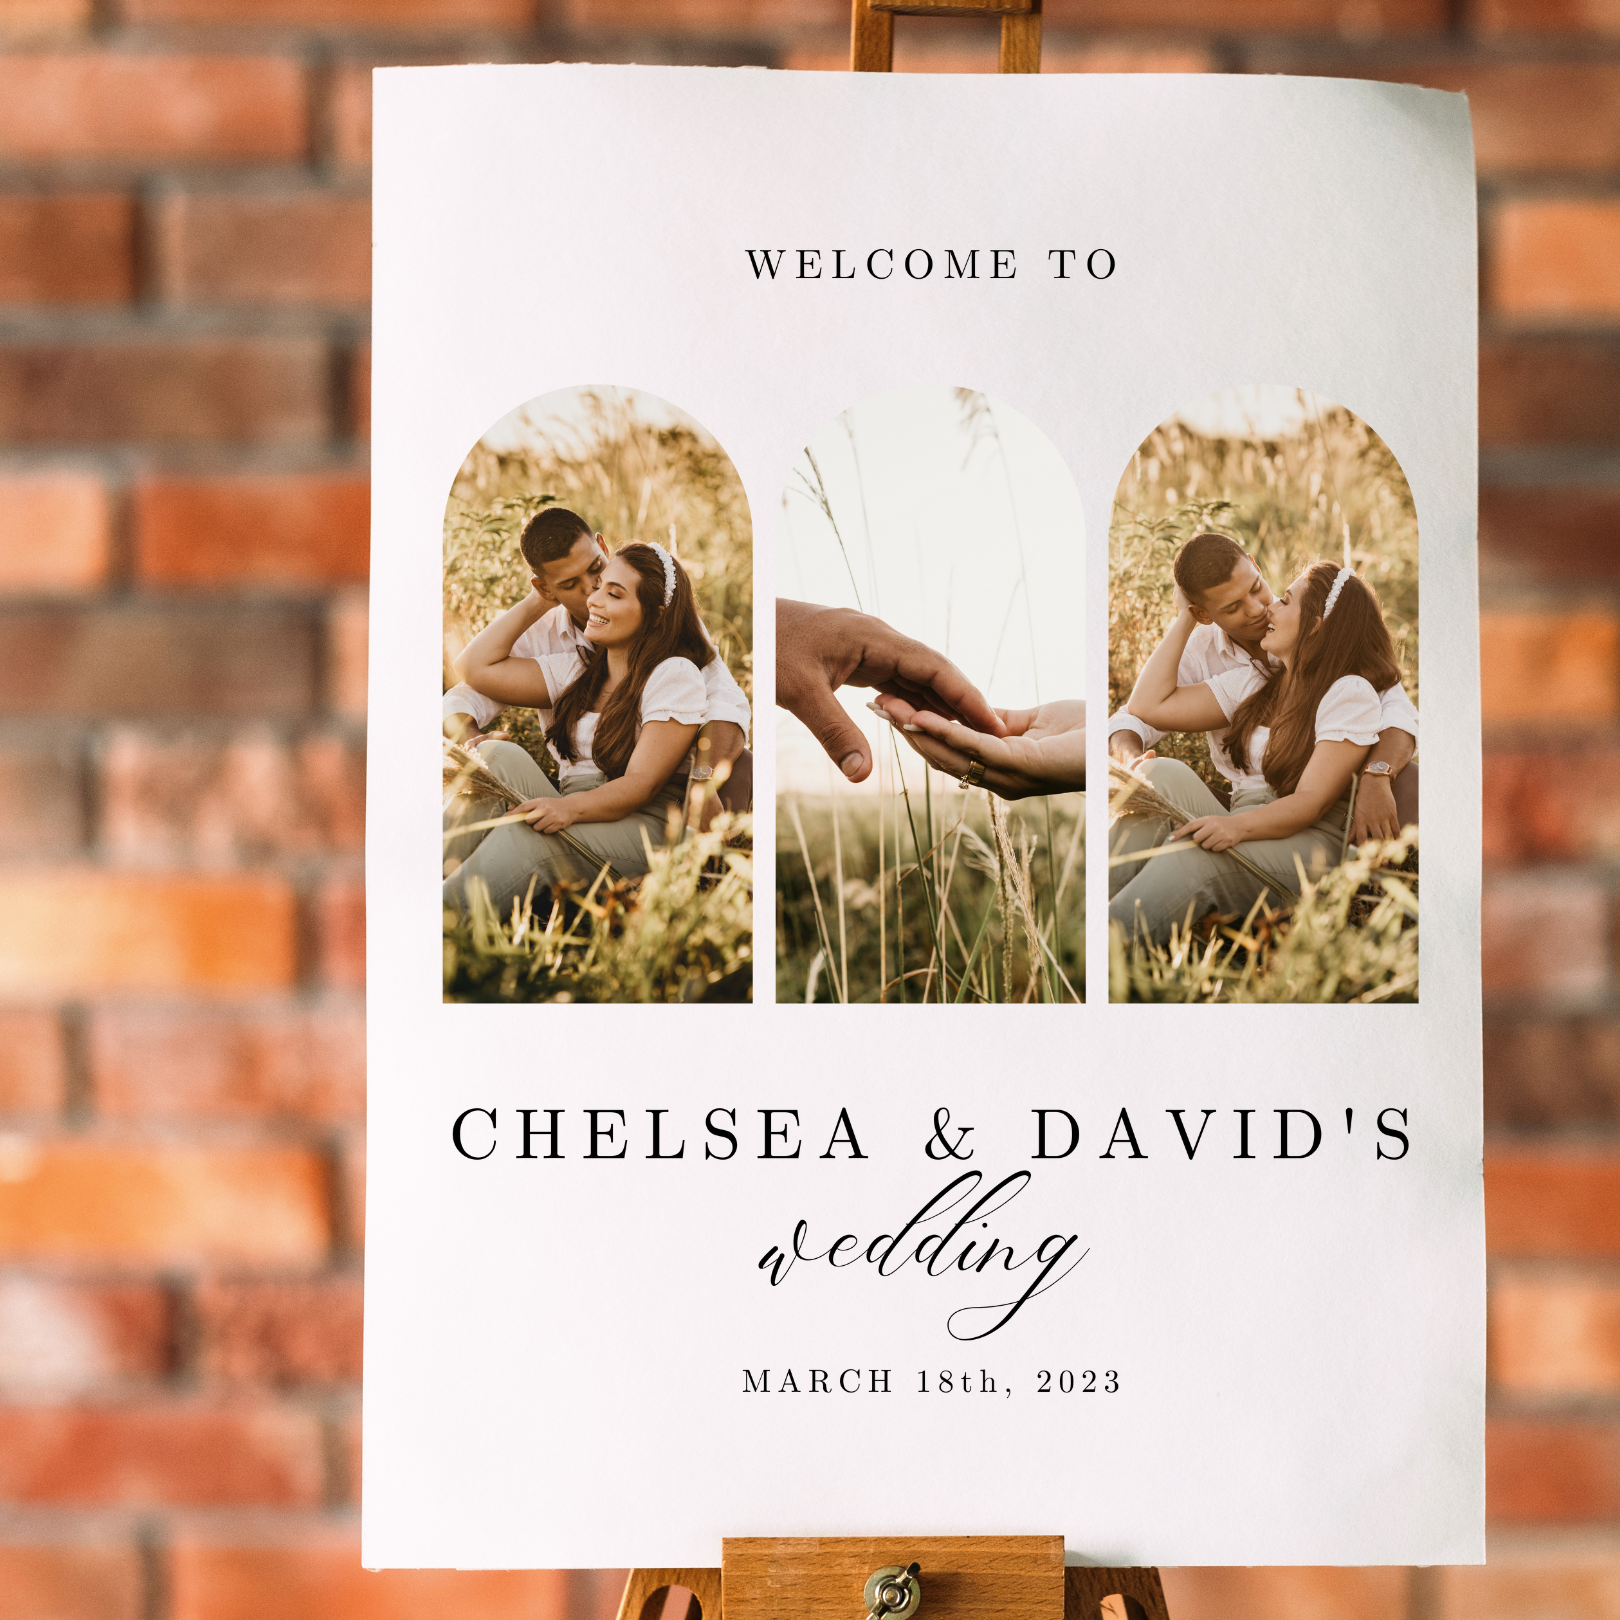 A wedding welcome sign with pictures of a couple in a grassy field sits on an easel against a brick background. 